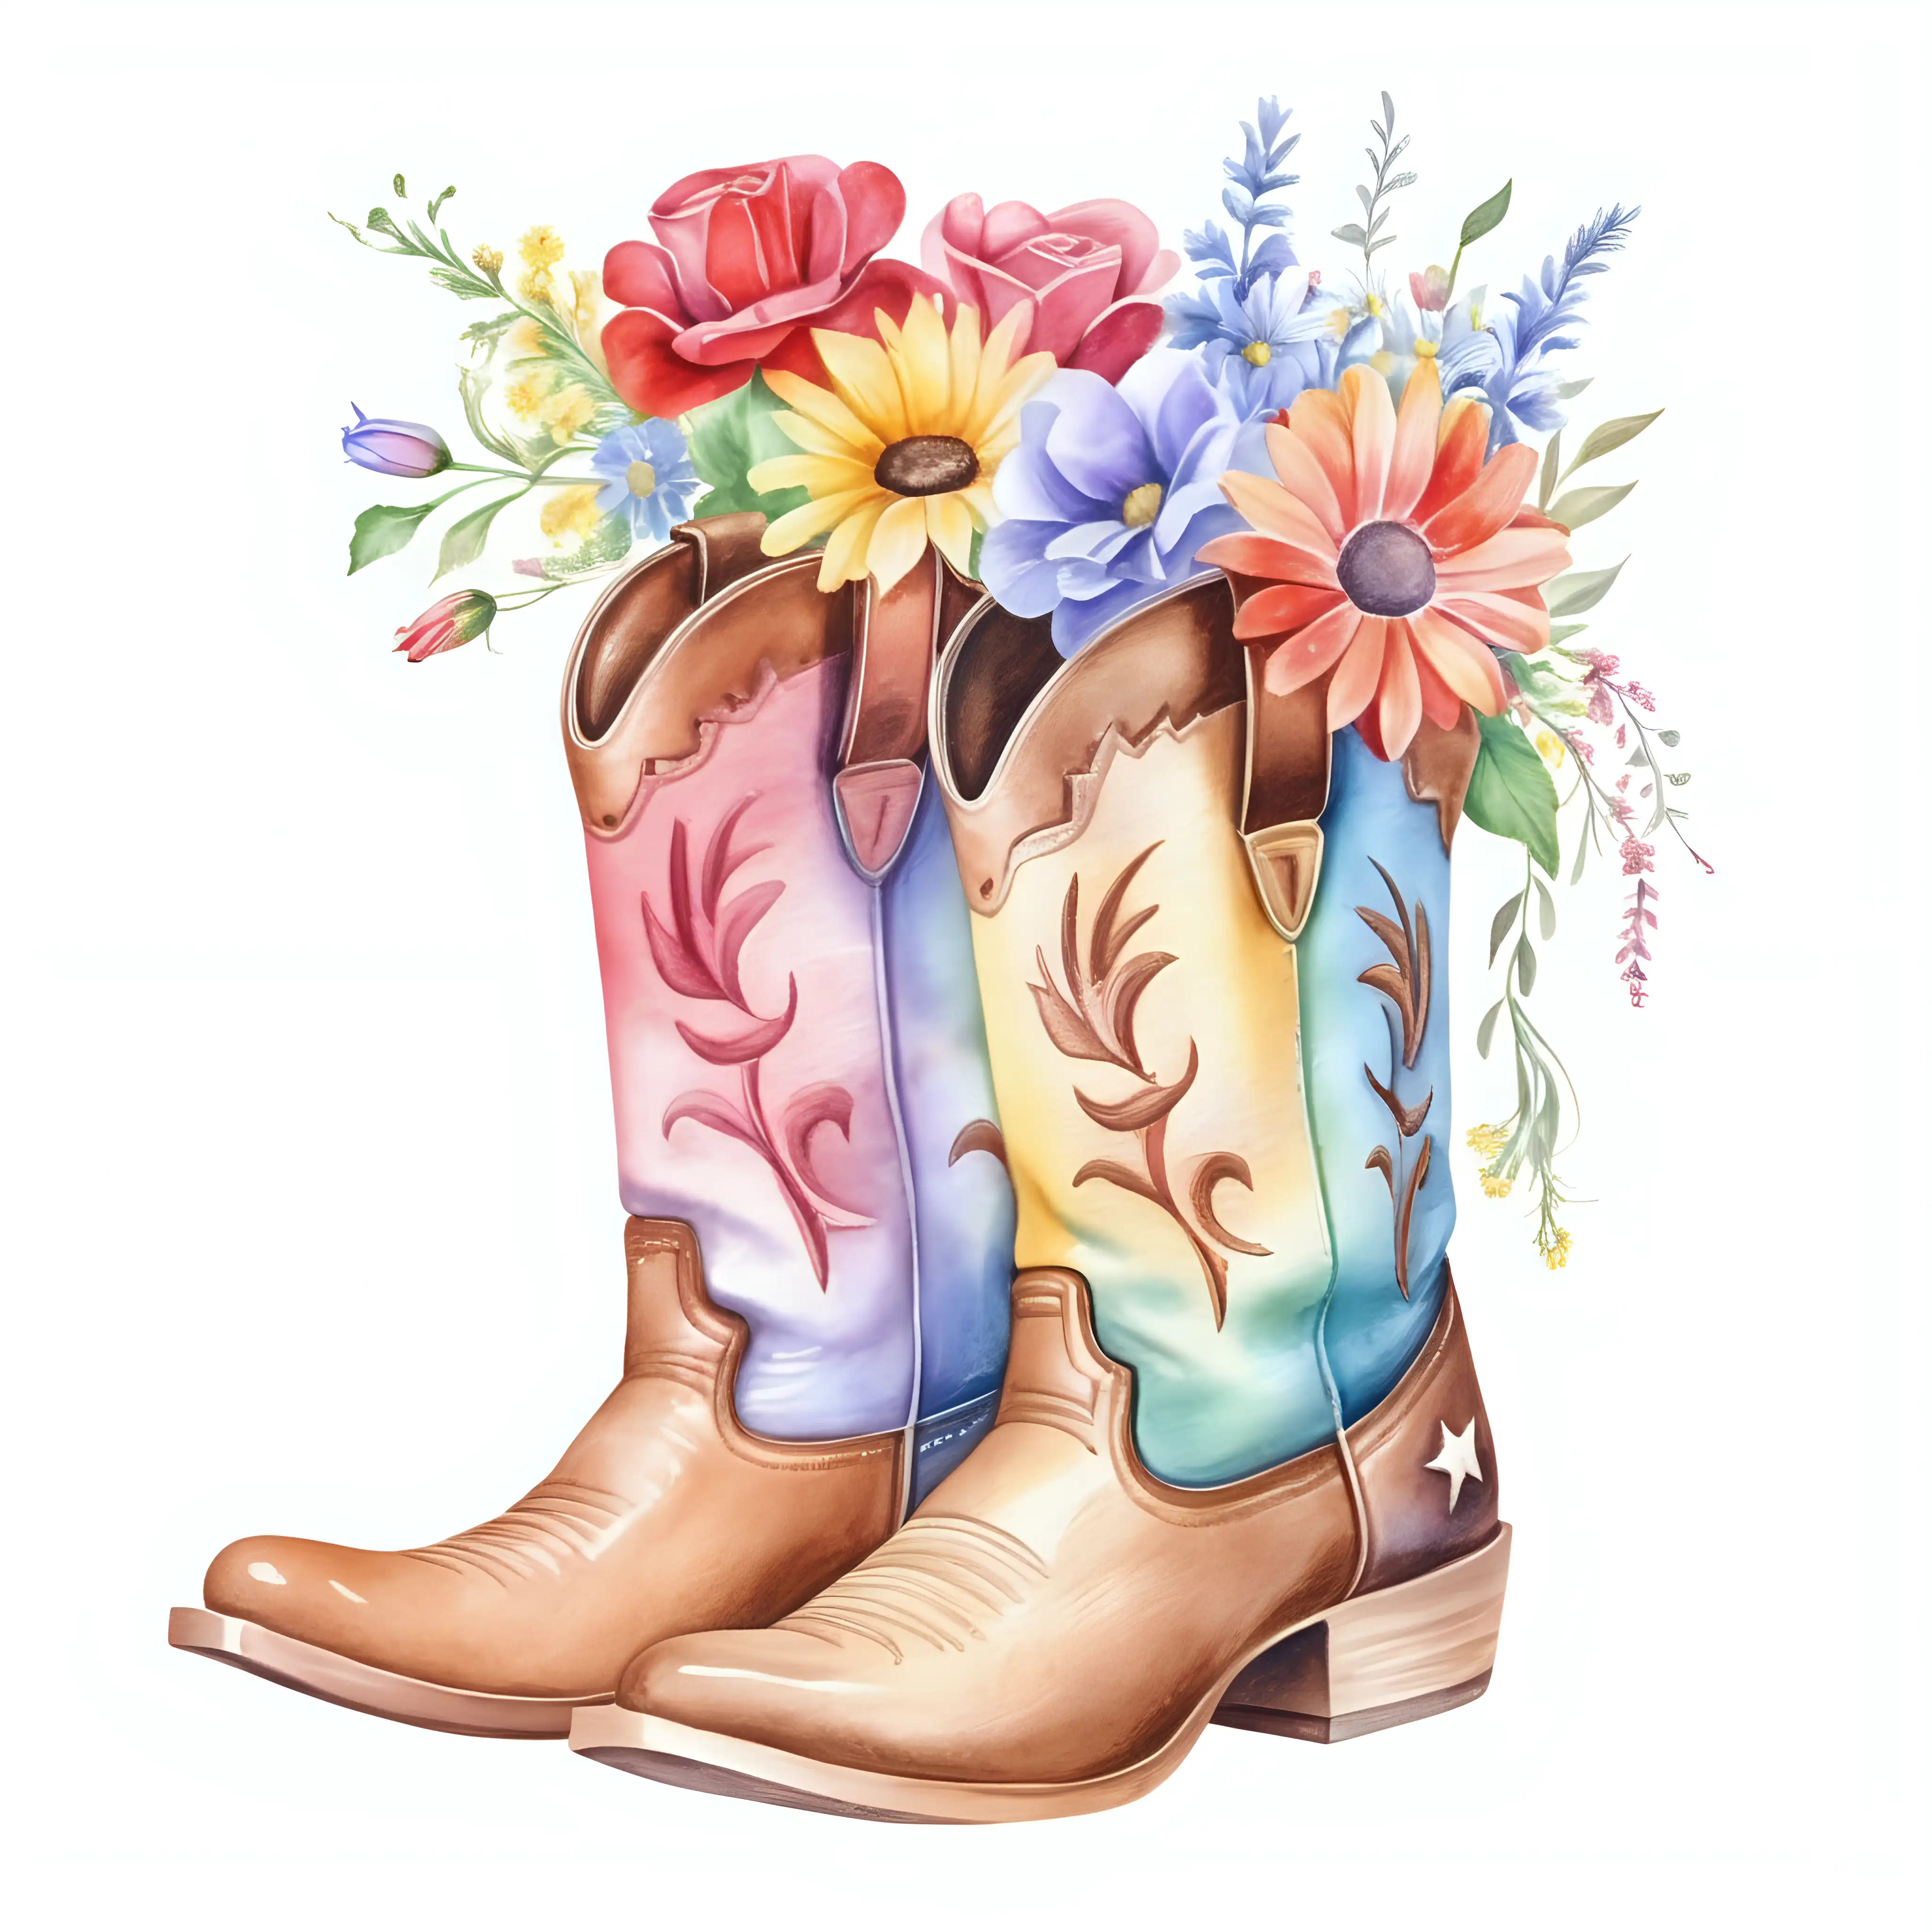 watercolor cowboy boots with flowers coming out of boots, isolated image on white background
